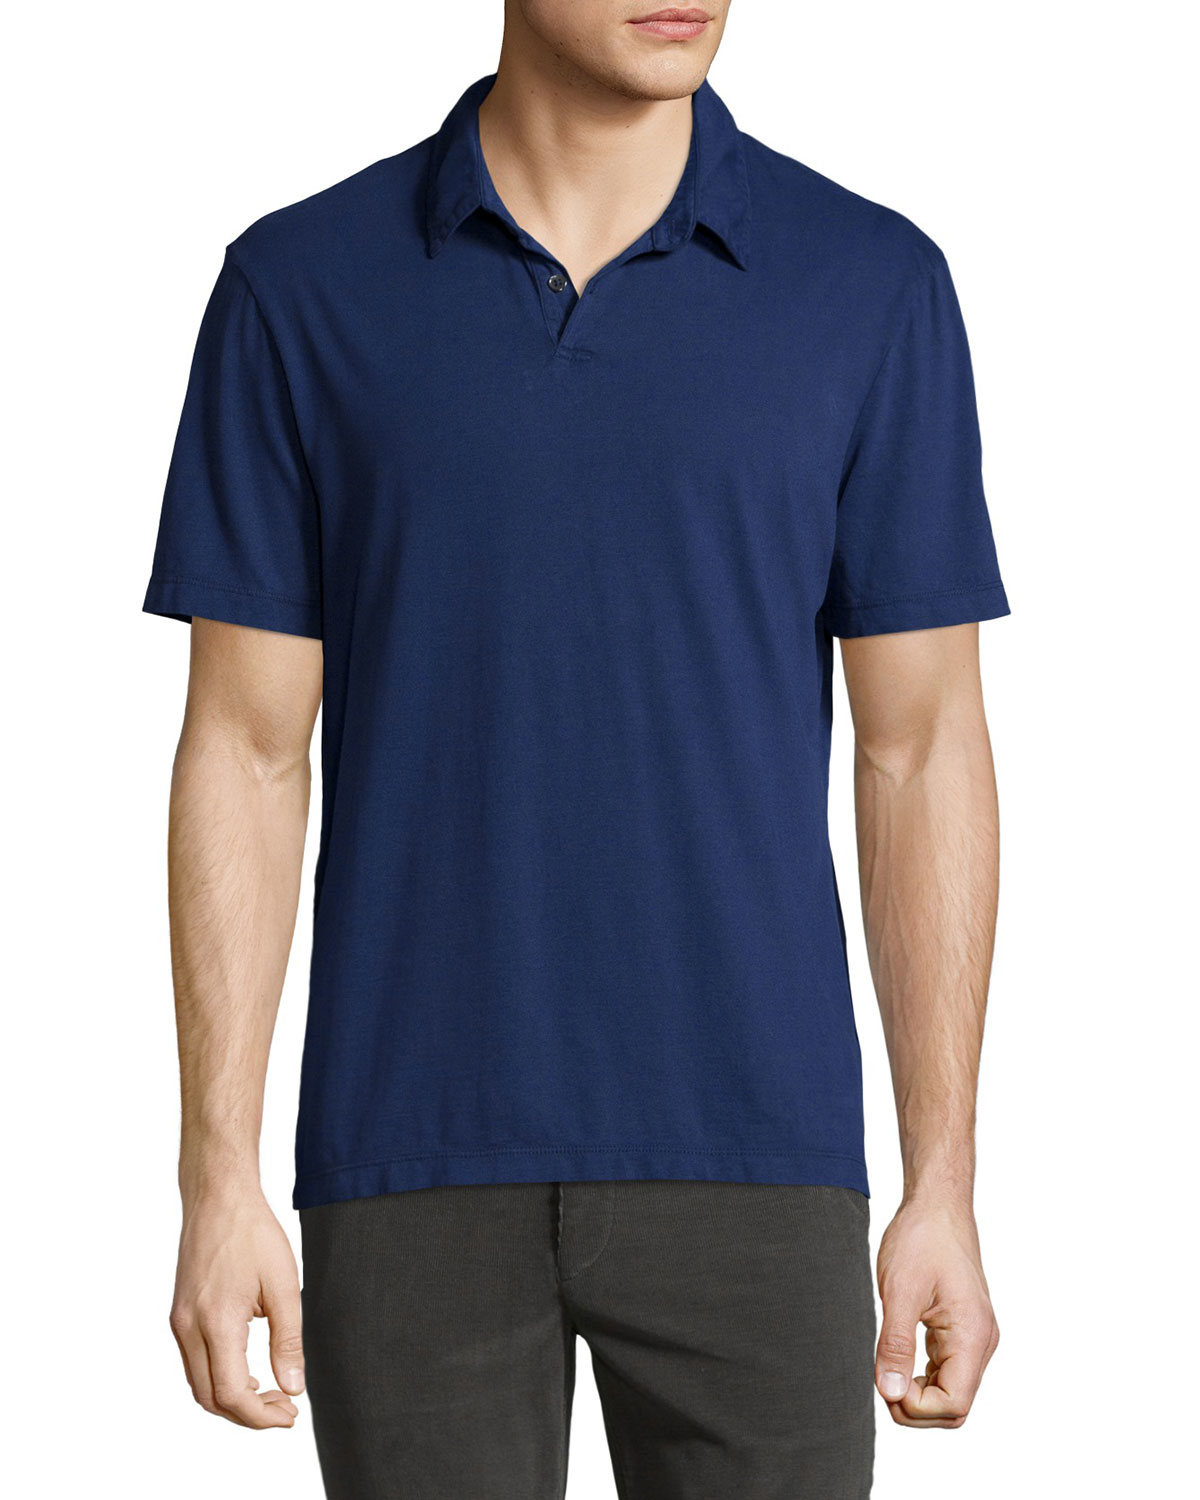 Lyst - James Perse Cashmere Short-sleeve Polo Shirt in Blue for Men